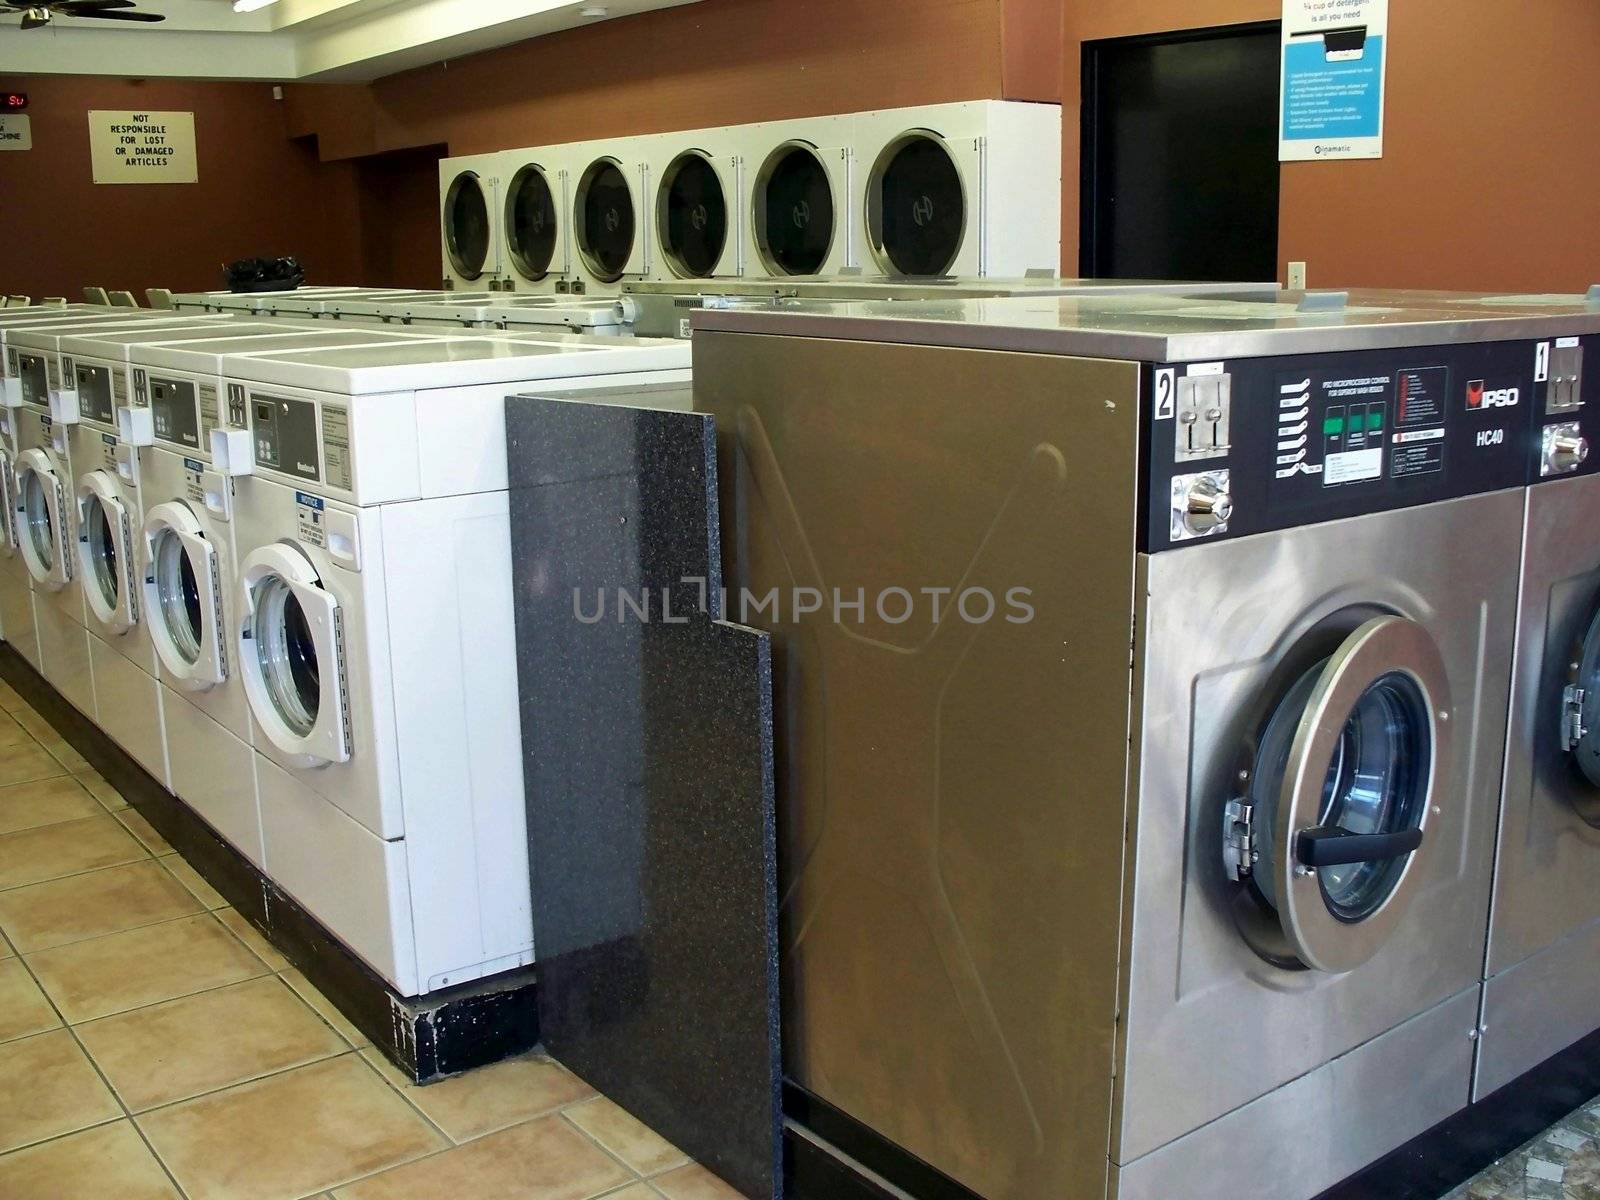 Laundromat
washing machines and dryers ready to use at the laundromat